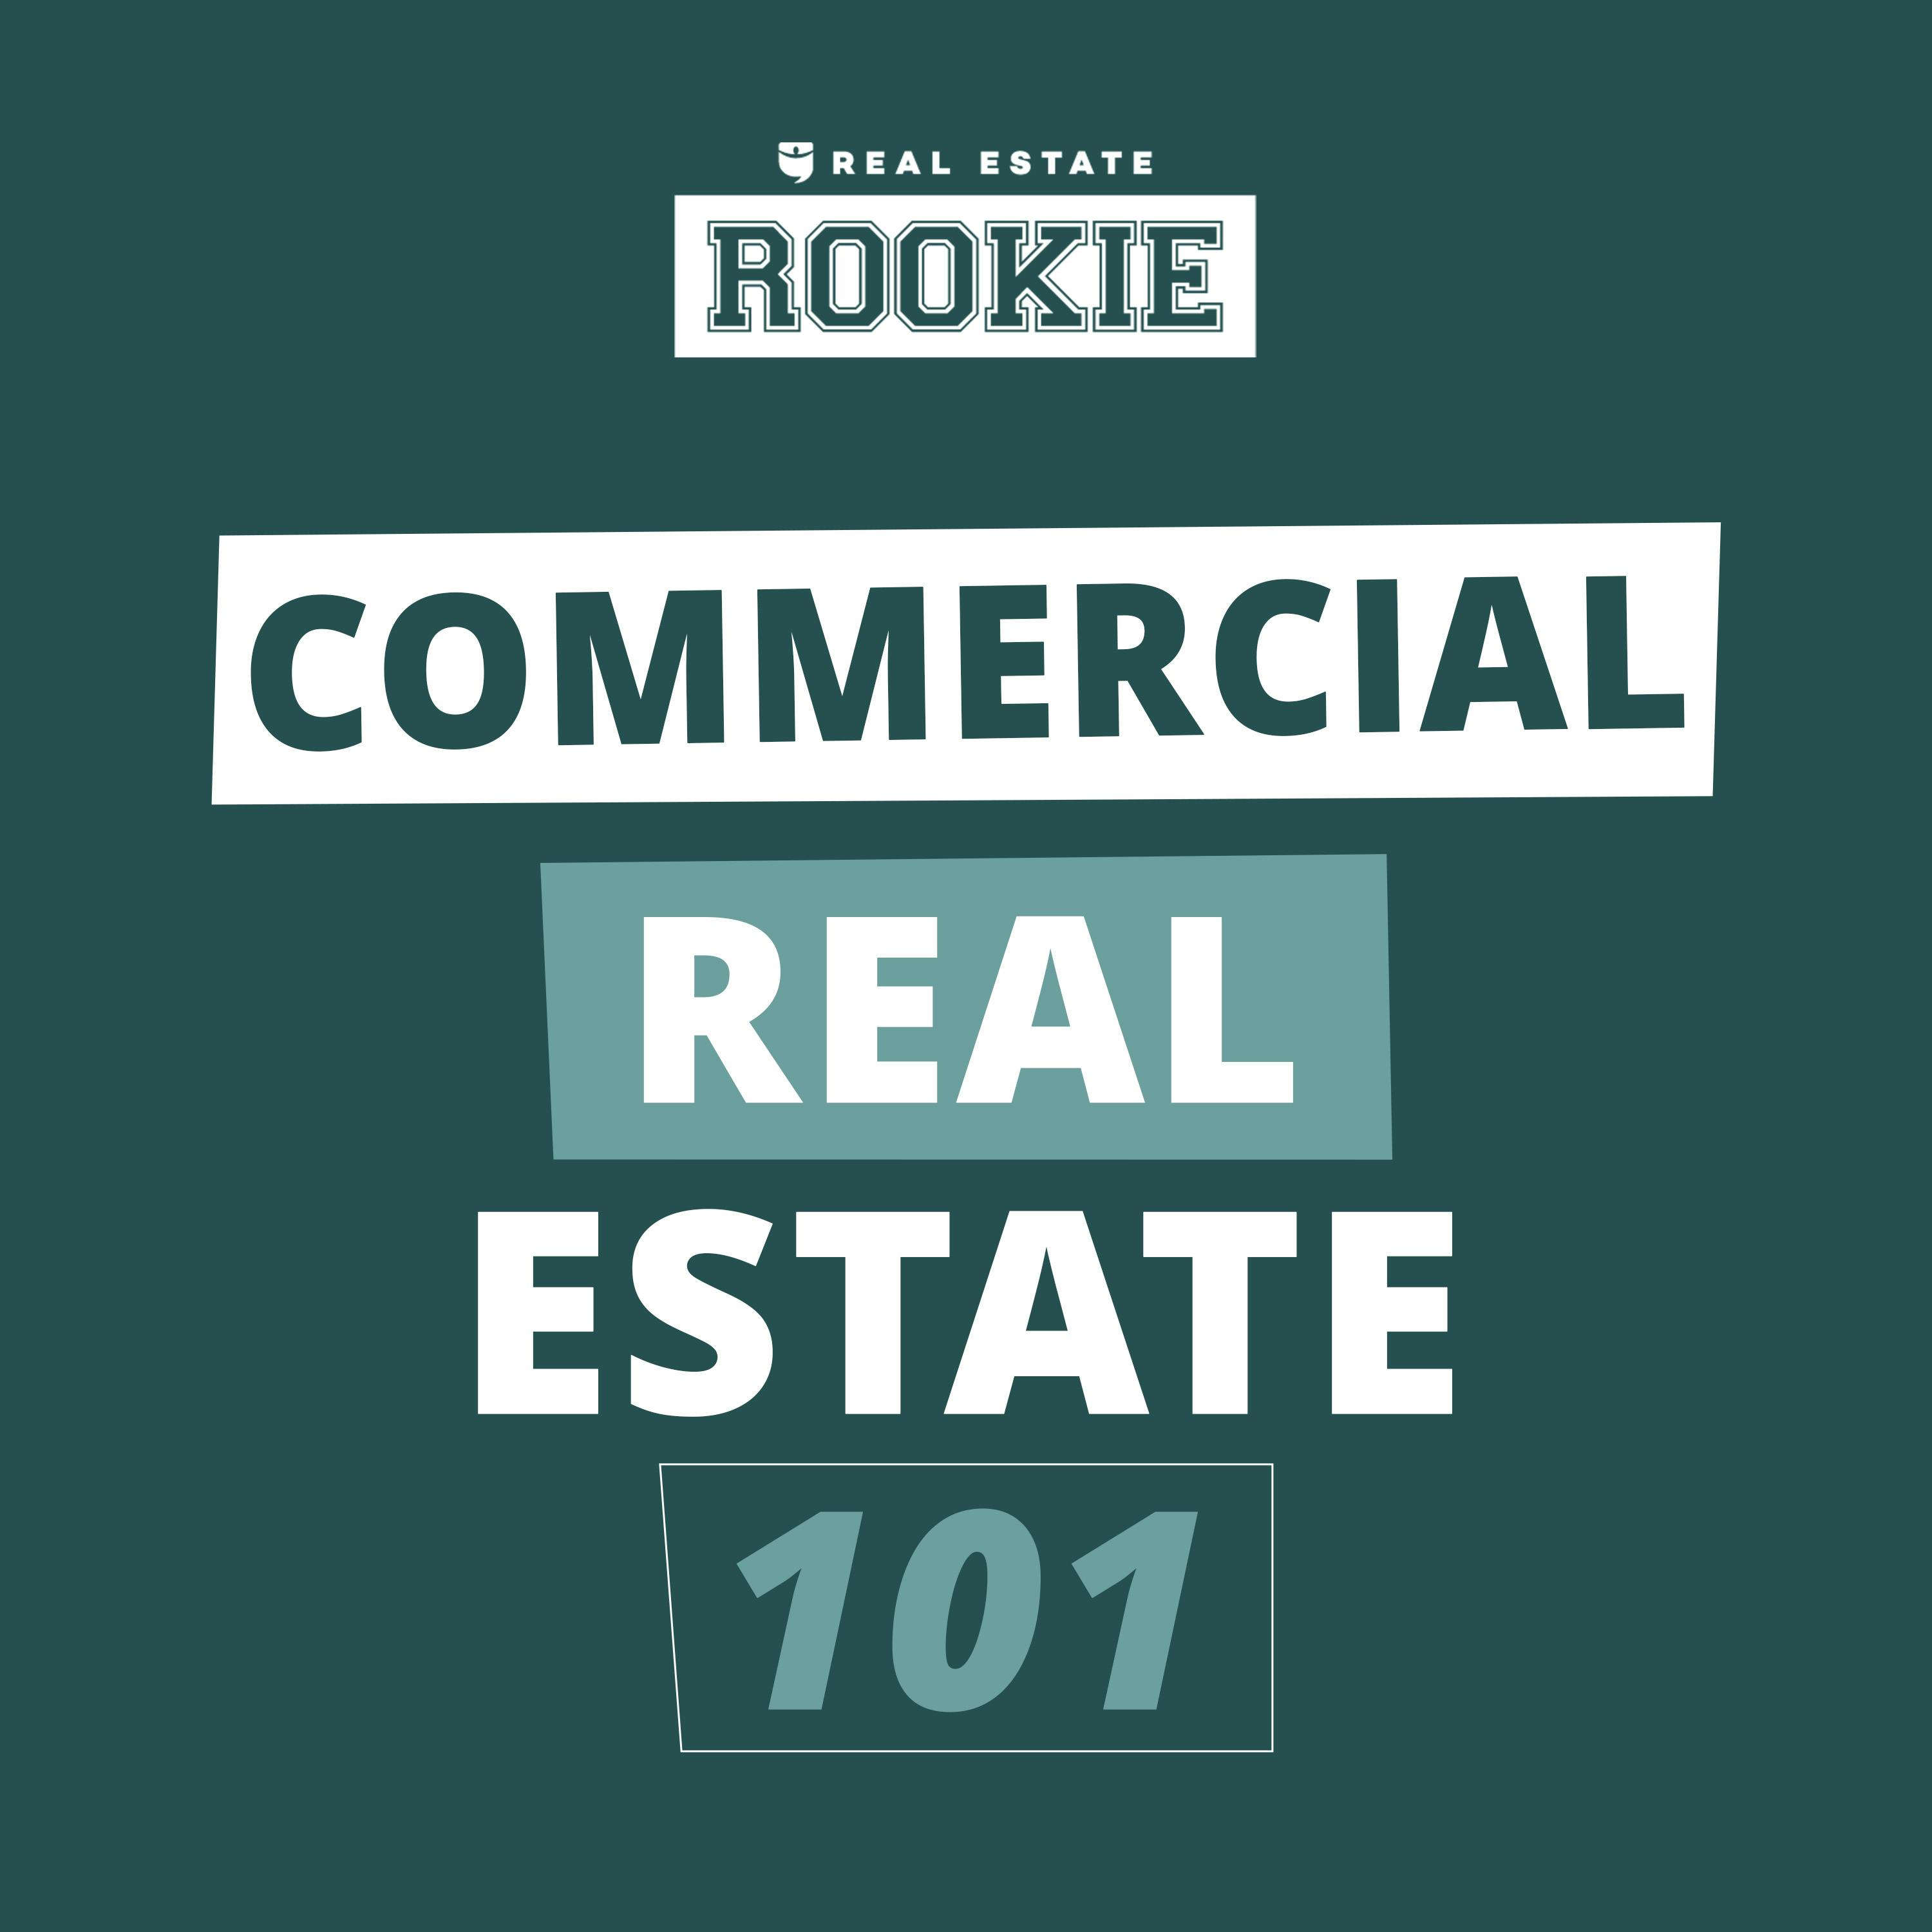 276: How to Get Into Commercial Real Estate Investing (For Beginners)